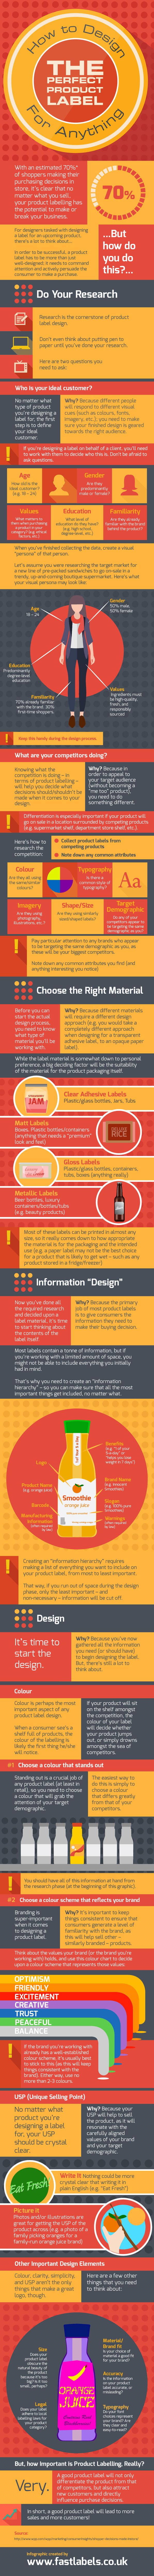 Product label design tips infographic